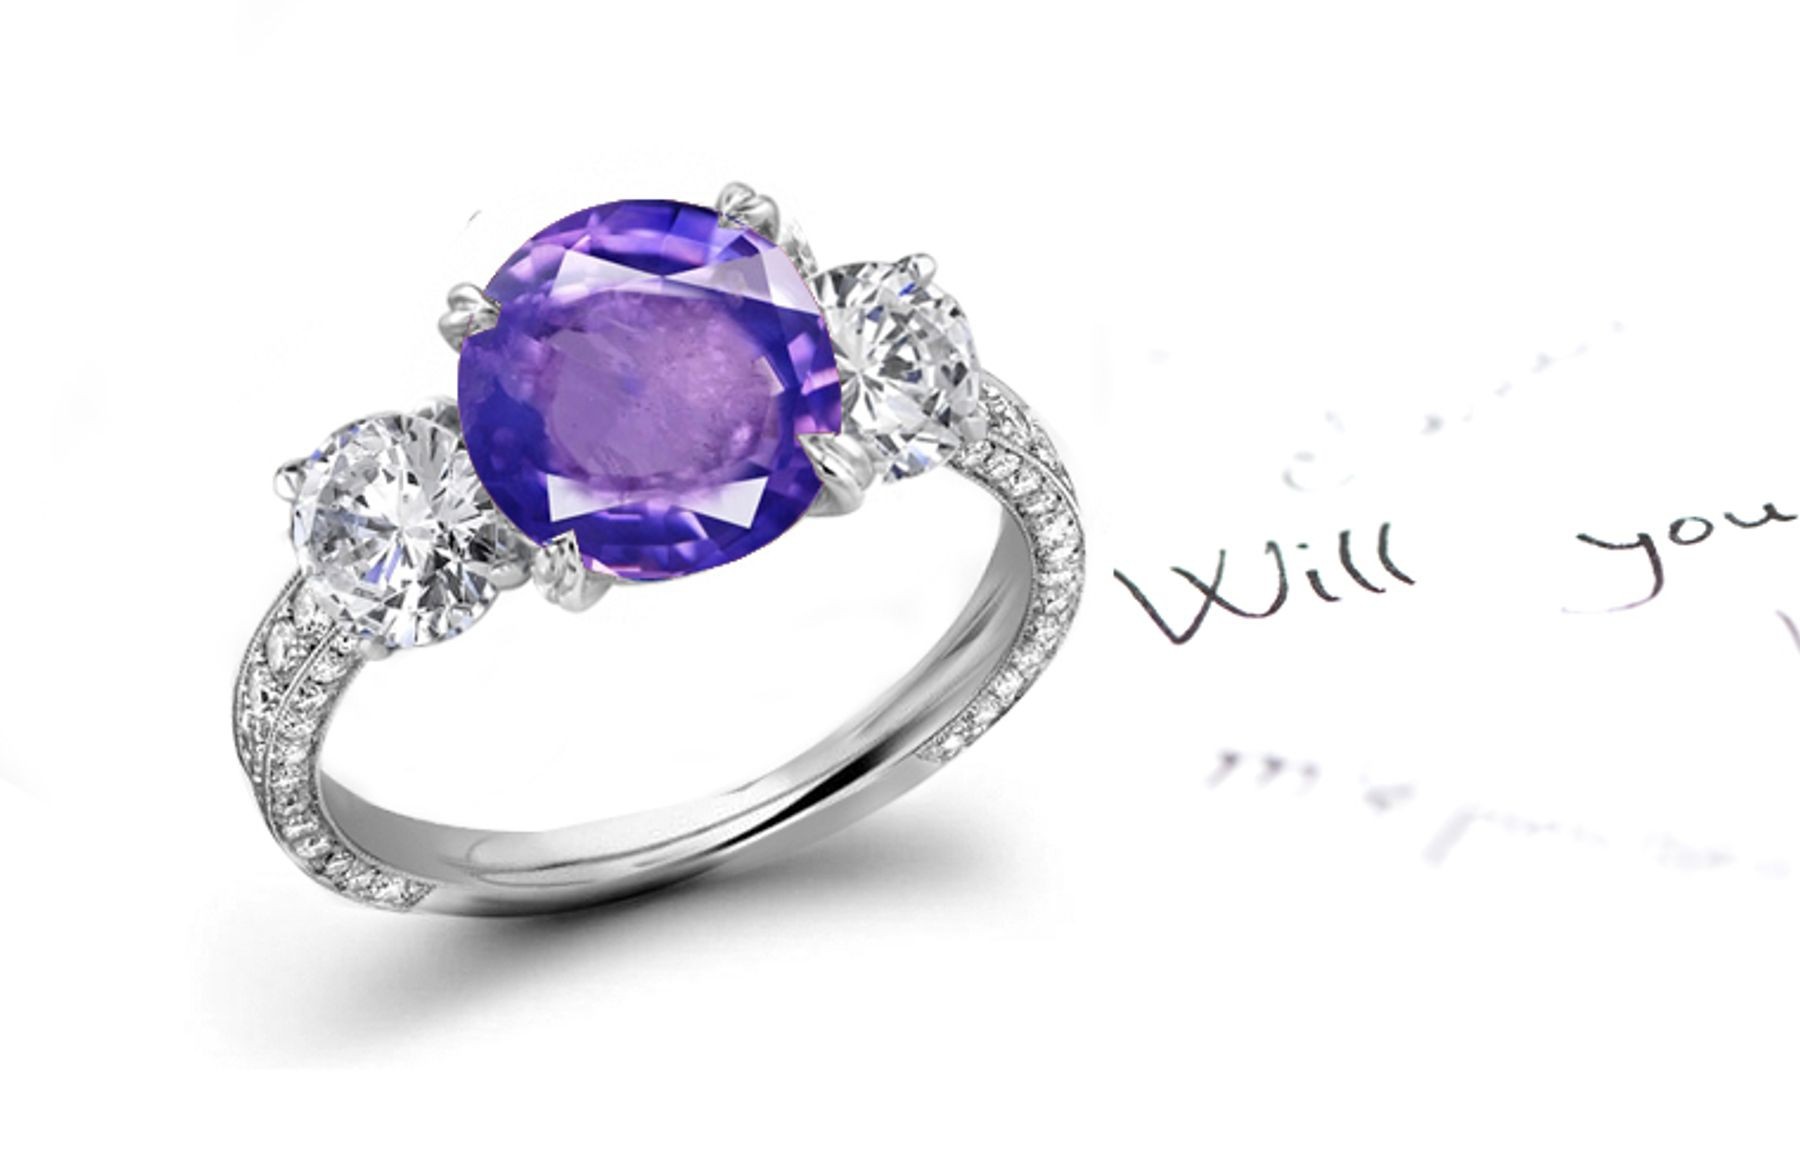 Dramatic: A Magnificent Blue Sapphire & Diamond Micro Pave Ring